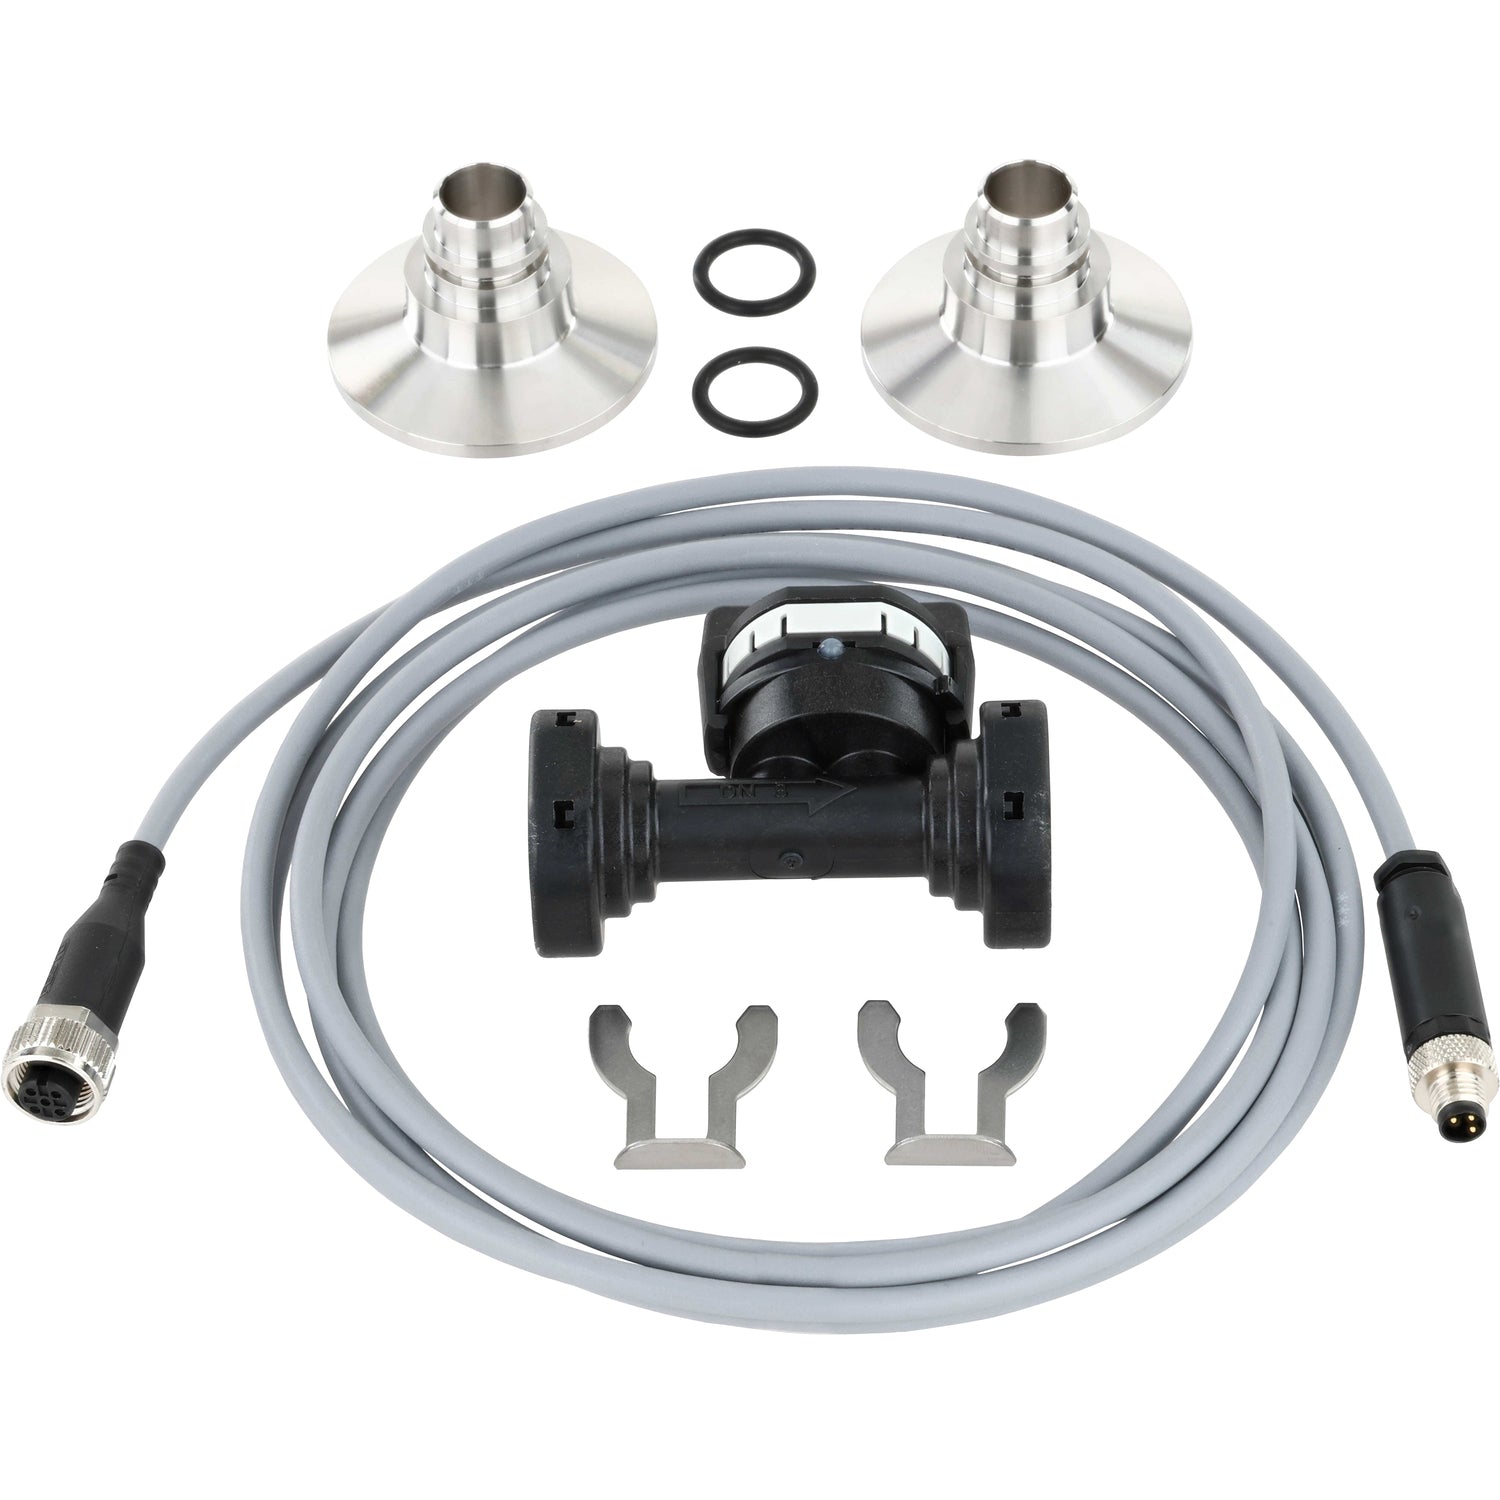 An assortment of parts on a white background that include two tri-clamp adapters, two rubber o-rings, two mounting clips, a black and white flow sensor, and a grey coiled sensor cable.